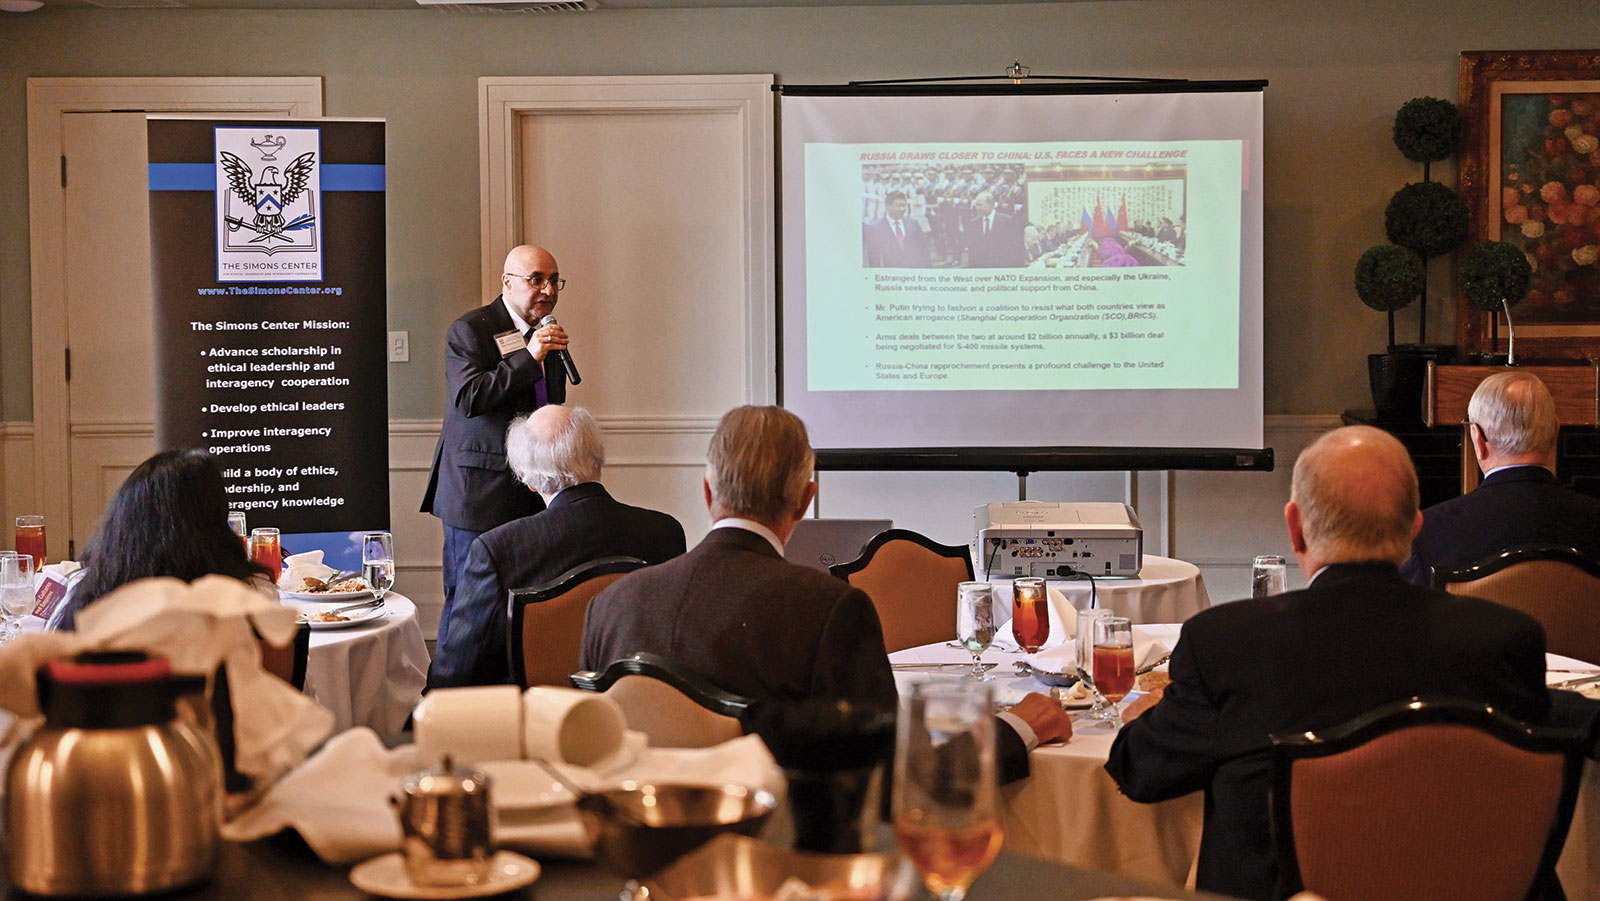 Dr. Mahir Ibrahimov, director of the Cultural and Area Studies Office (CASO), U.S. Army Command and General Staff College, delivers his presentation "Across Cultures and Empires" for the Arter-Rowland National Security Forum luncheon event on May 26, 2022, at the Carriage Club in Kansas City.